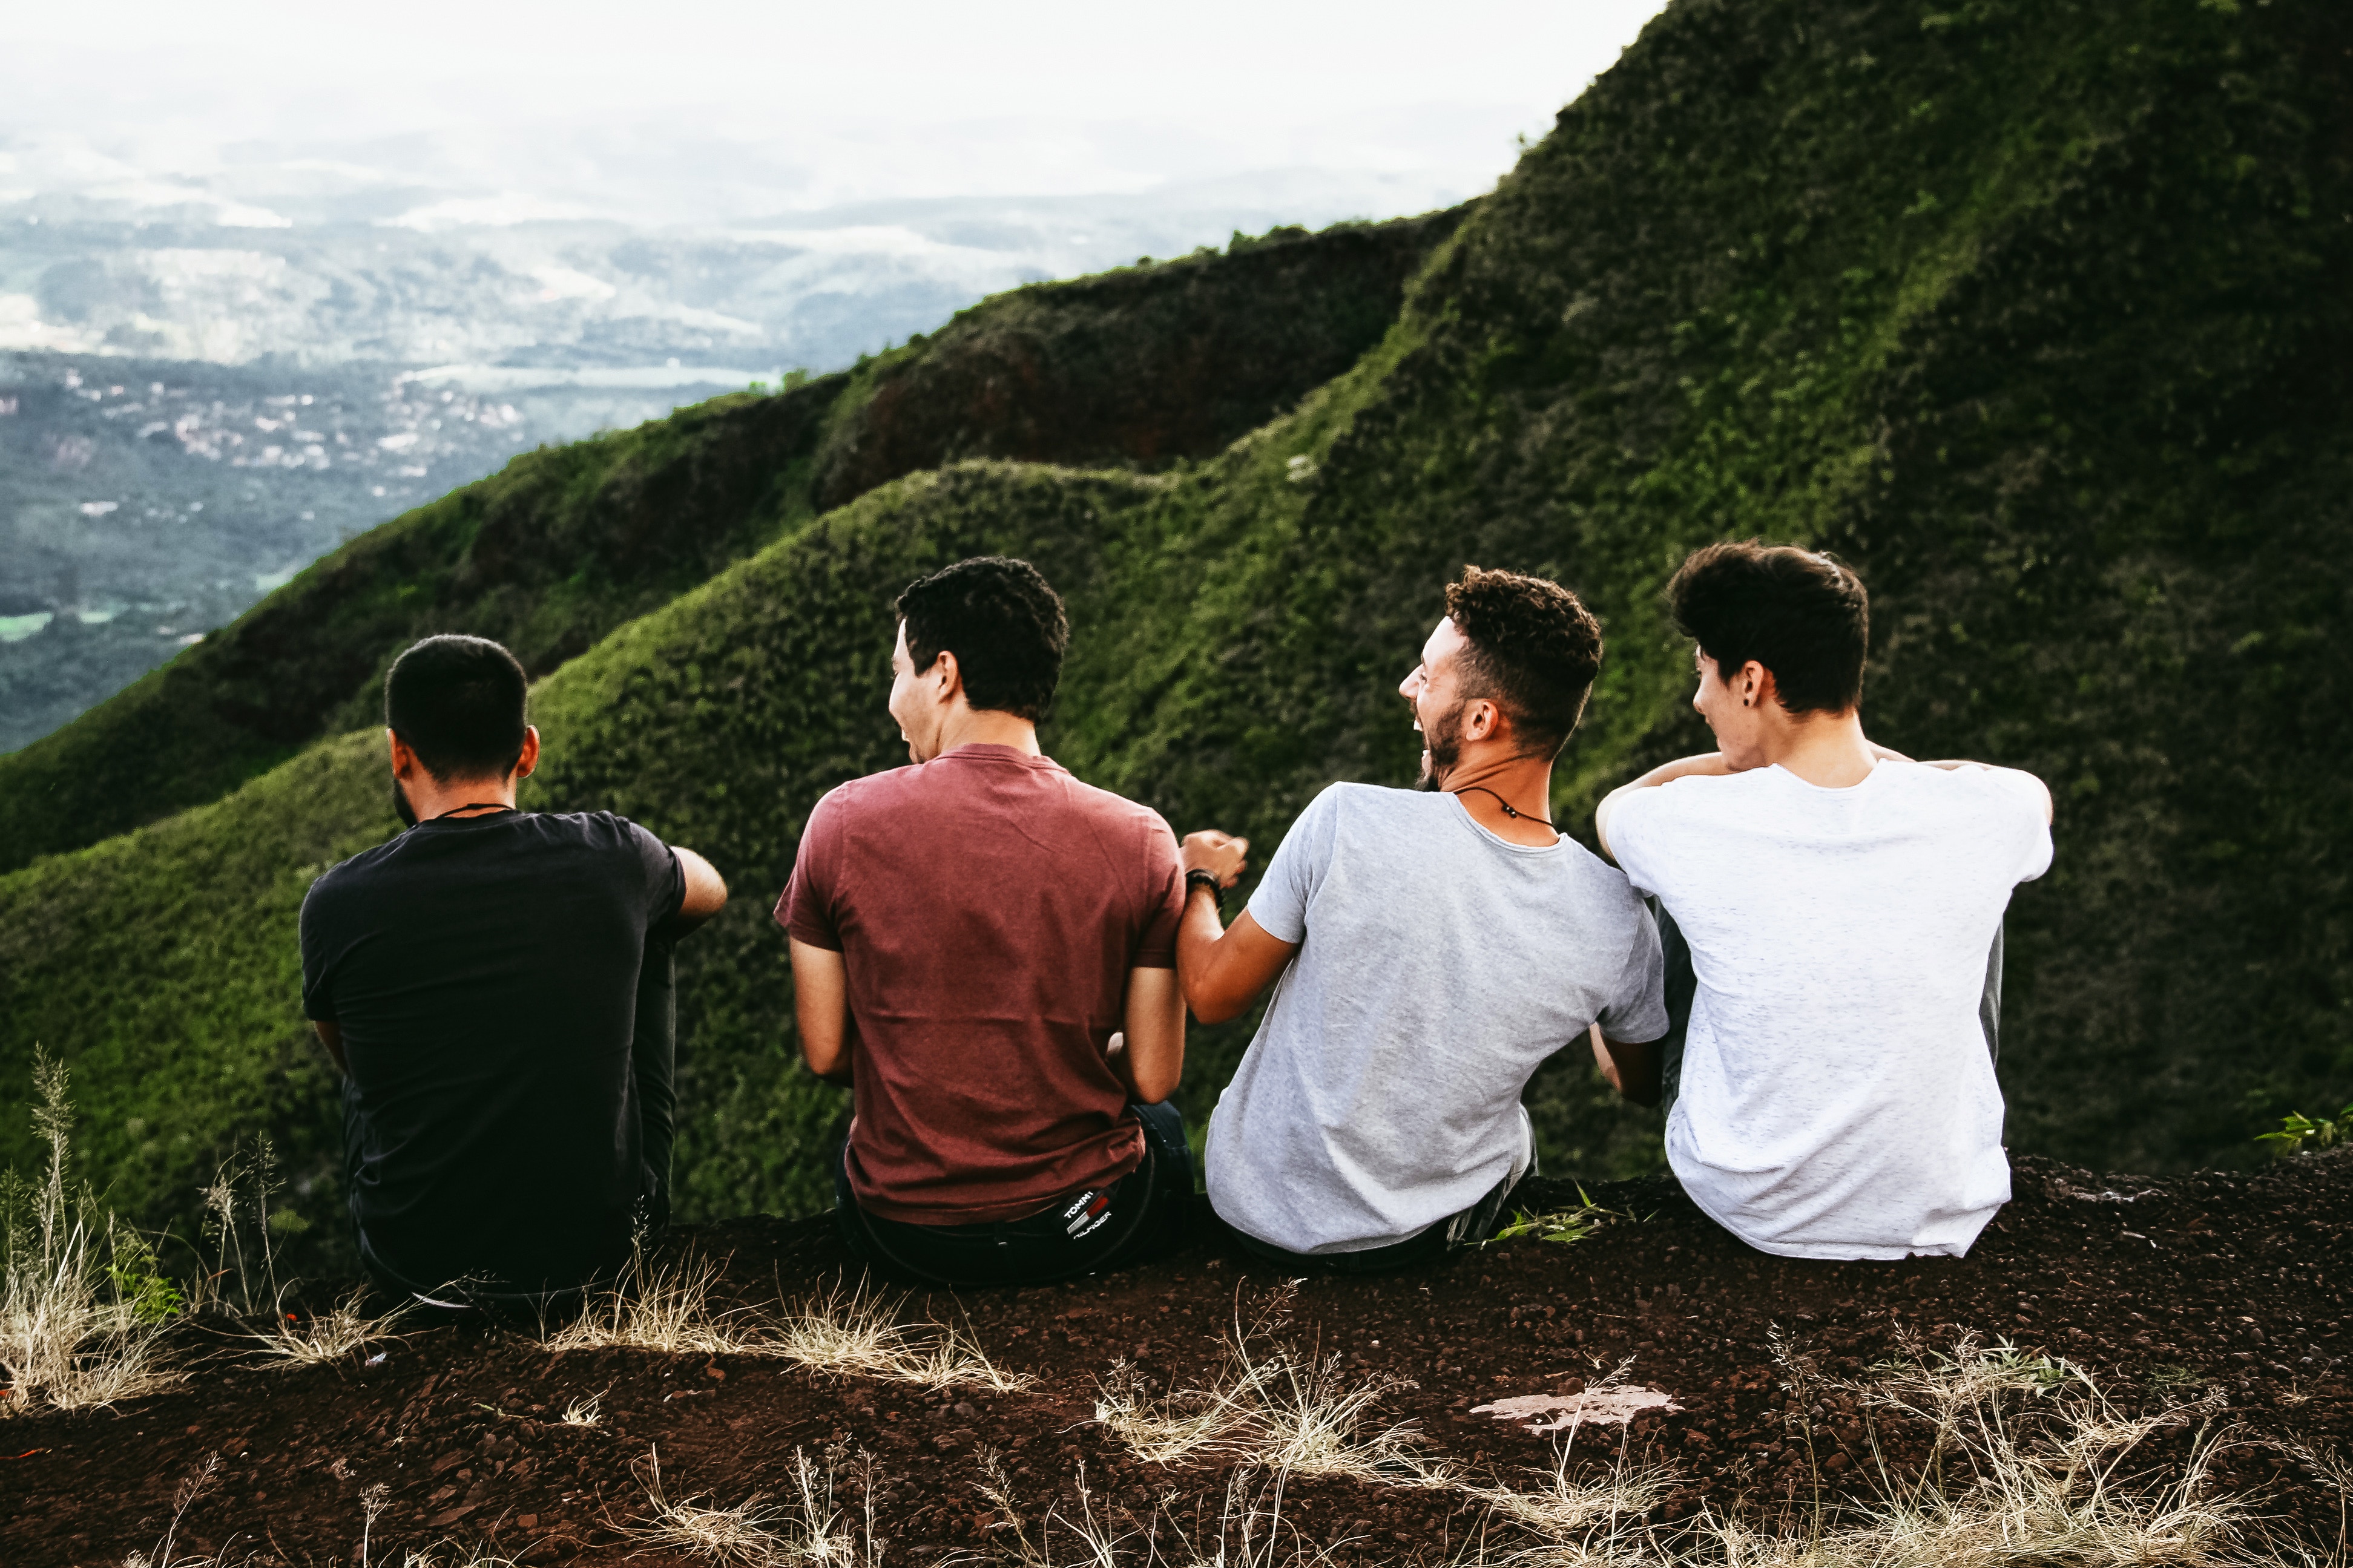 How Tender Loving Male Friendships Can Save Us From Toxic Masculinity The On Being Project